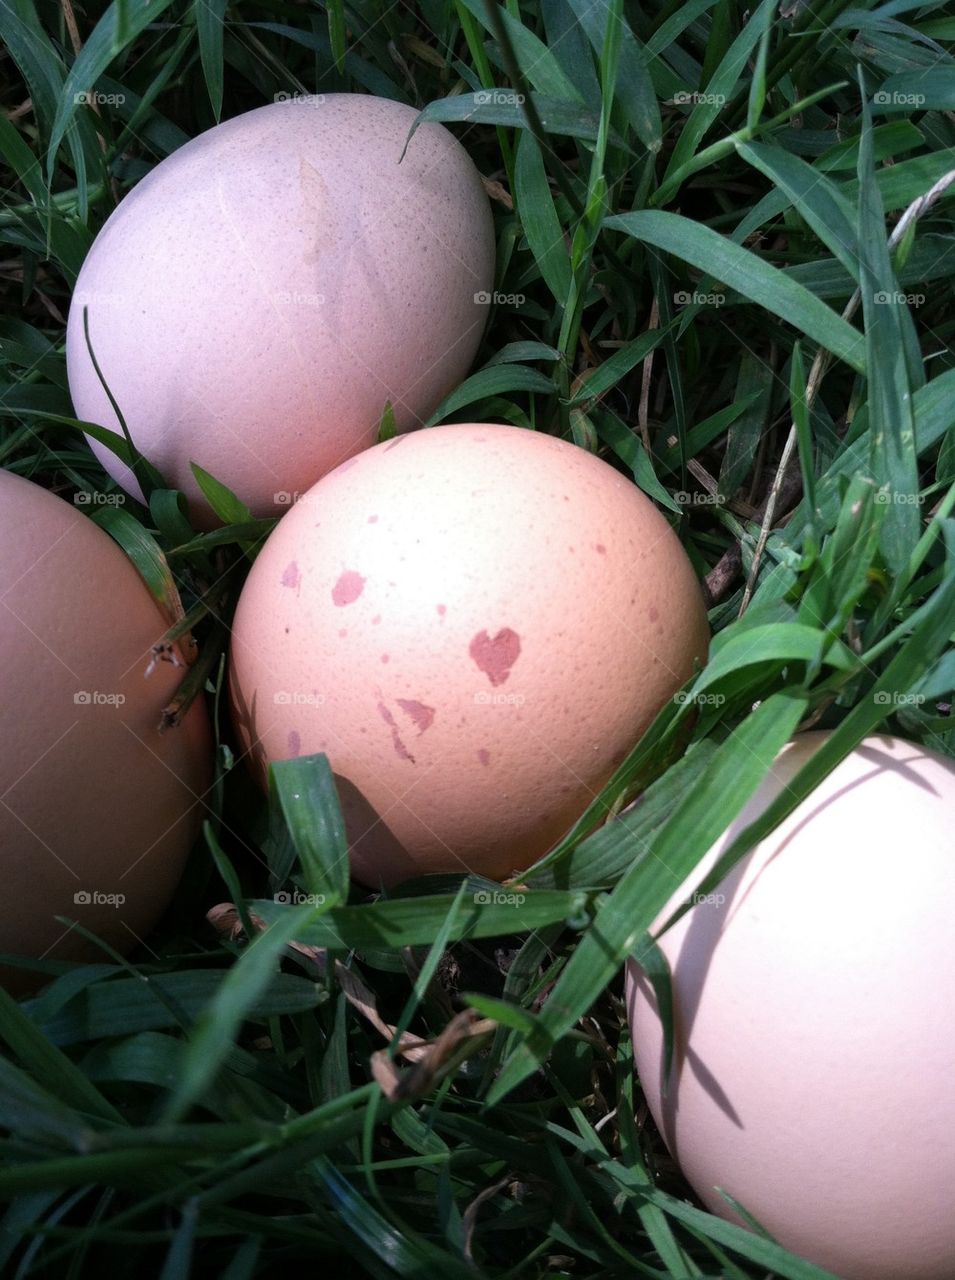 An Egg with Heart